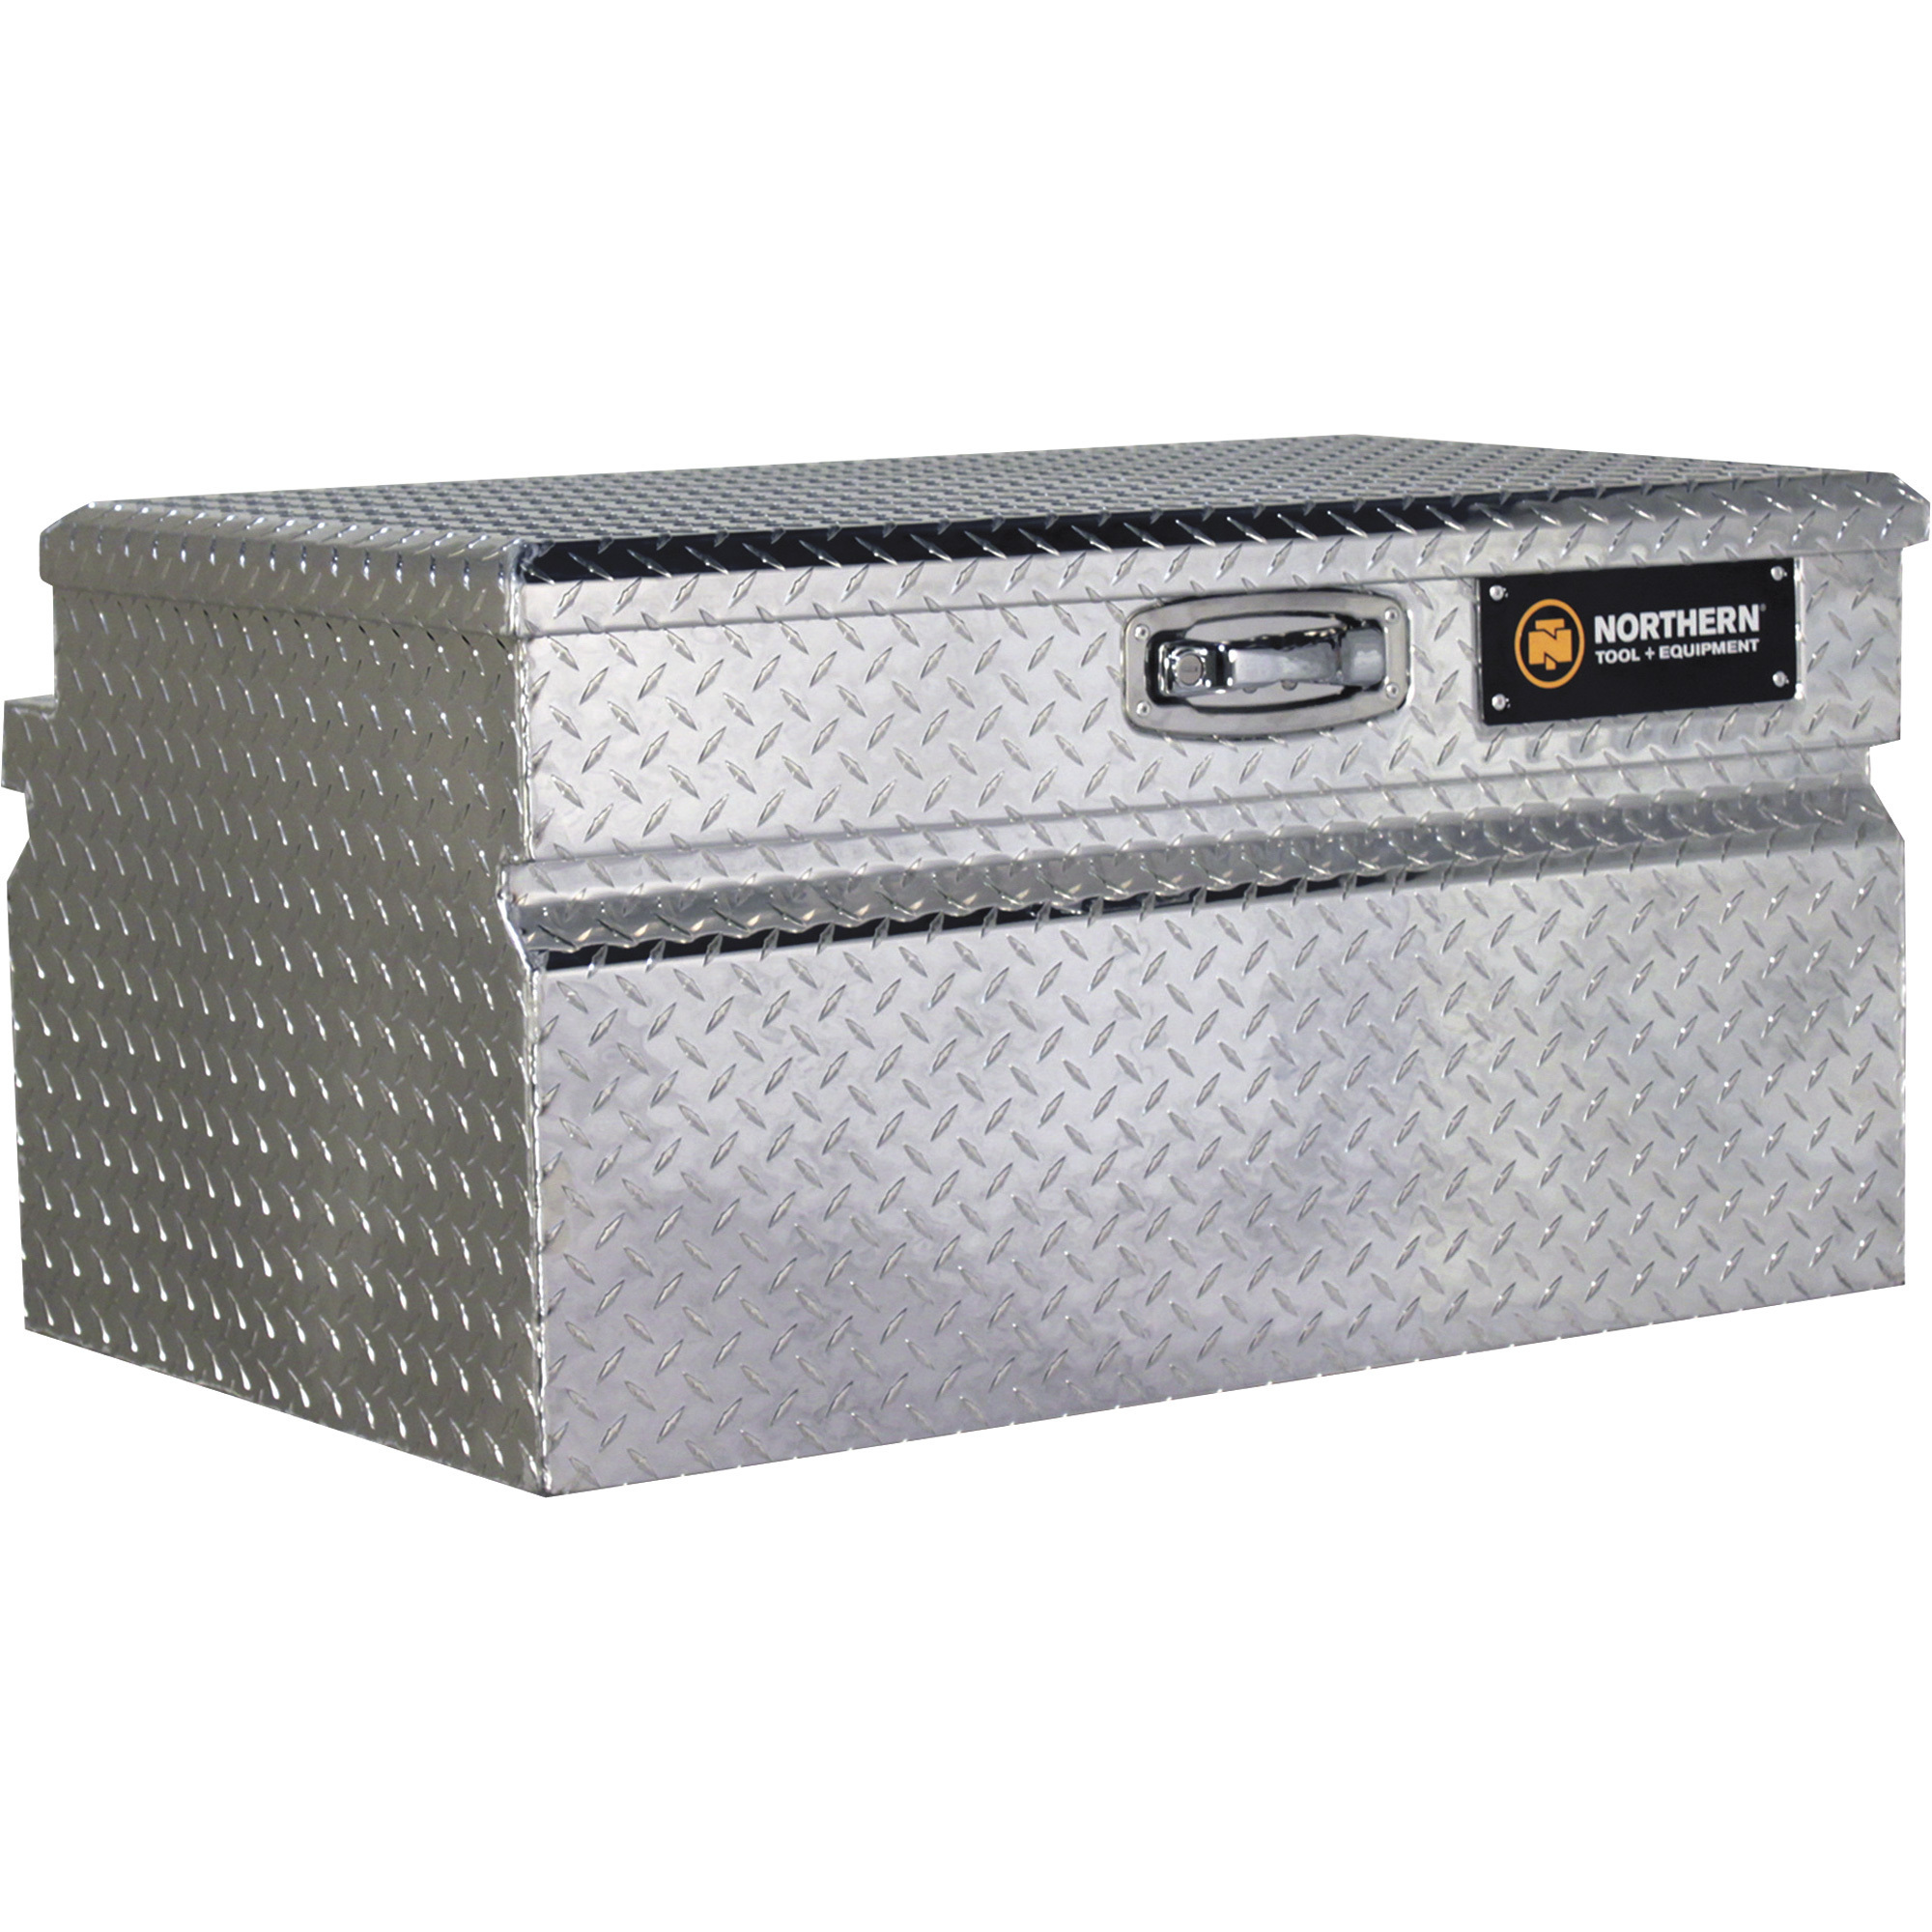 Northern Tool Wide Chest Truck Tool Box, Aluminum, Diamond Plate, Pull Handle Latch, 36Inch L x 24Inch W x 18Inch H, Model 36012747